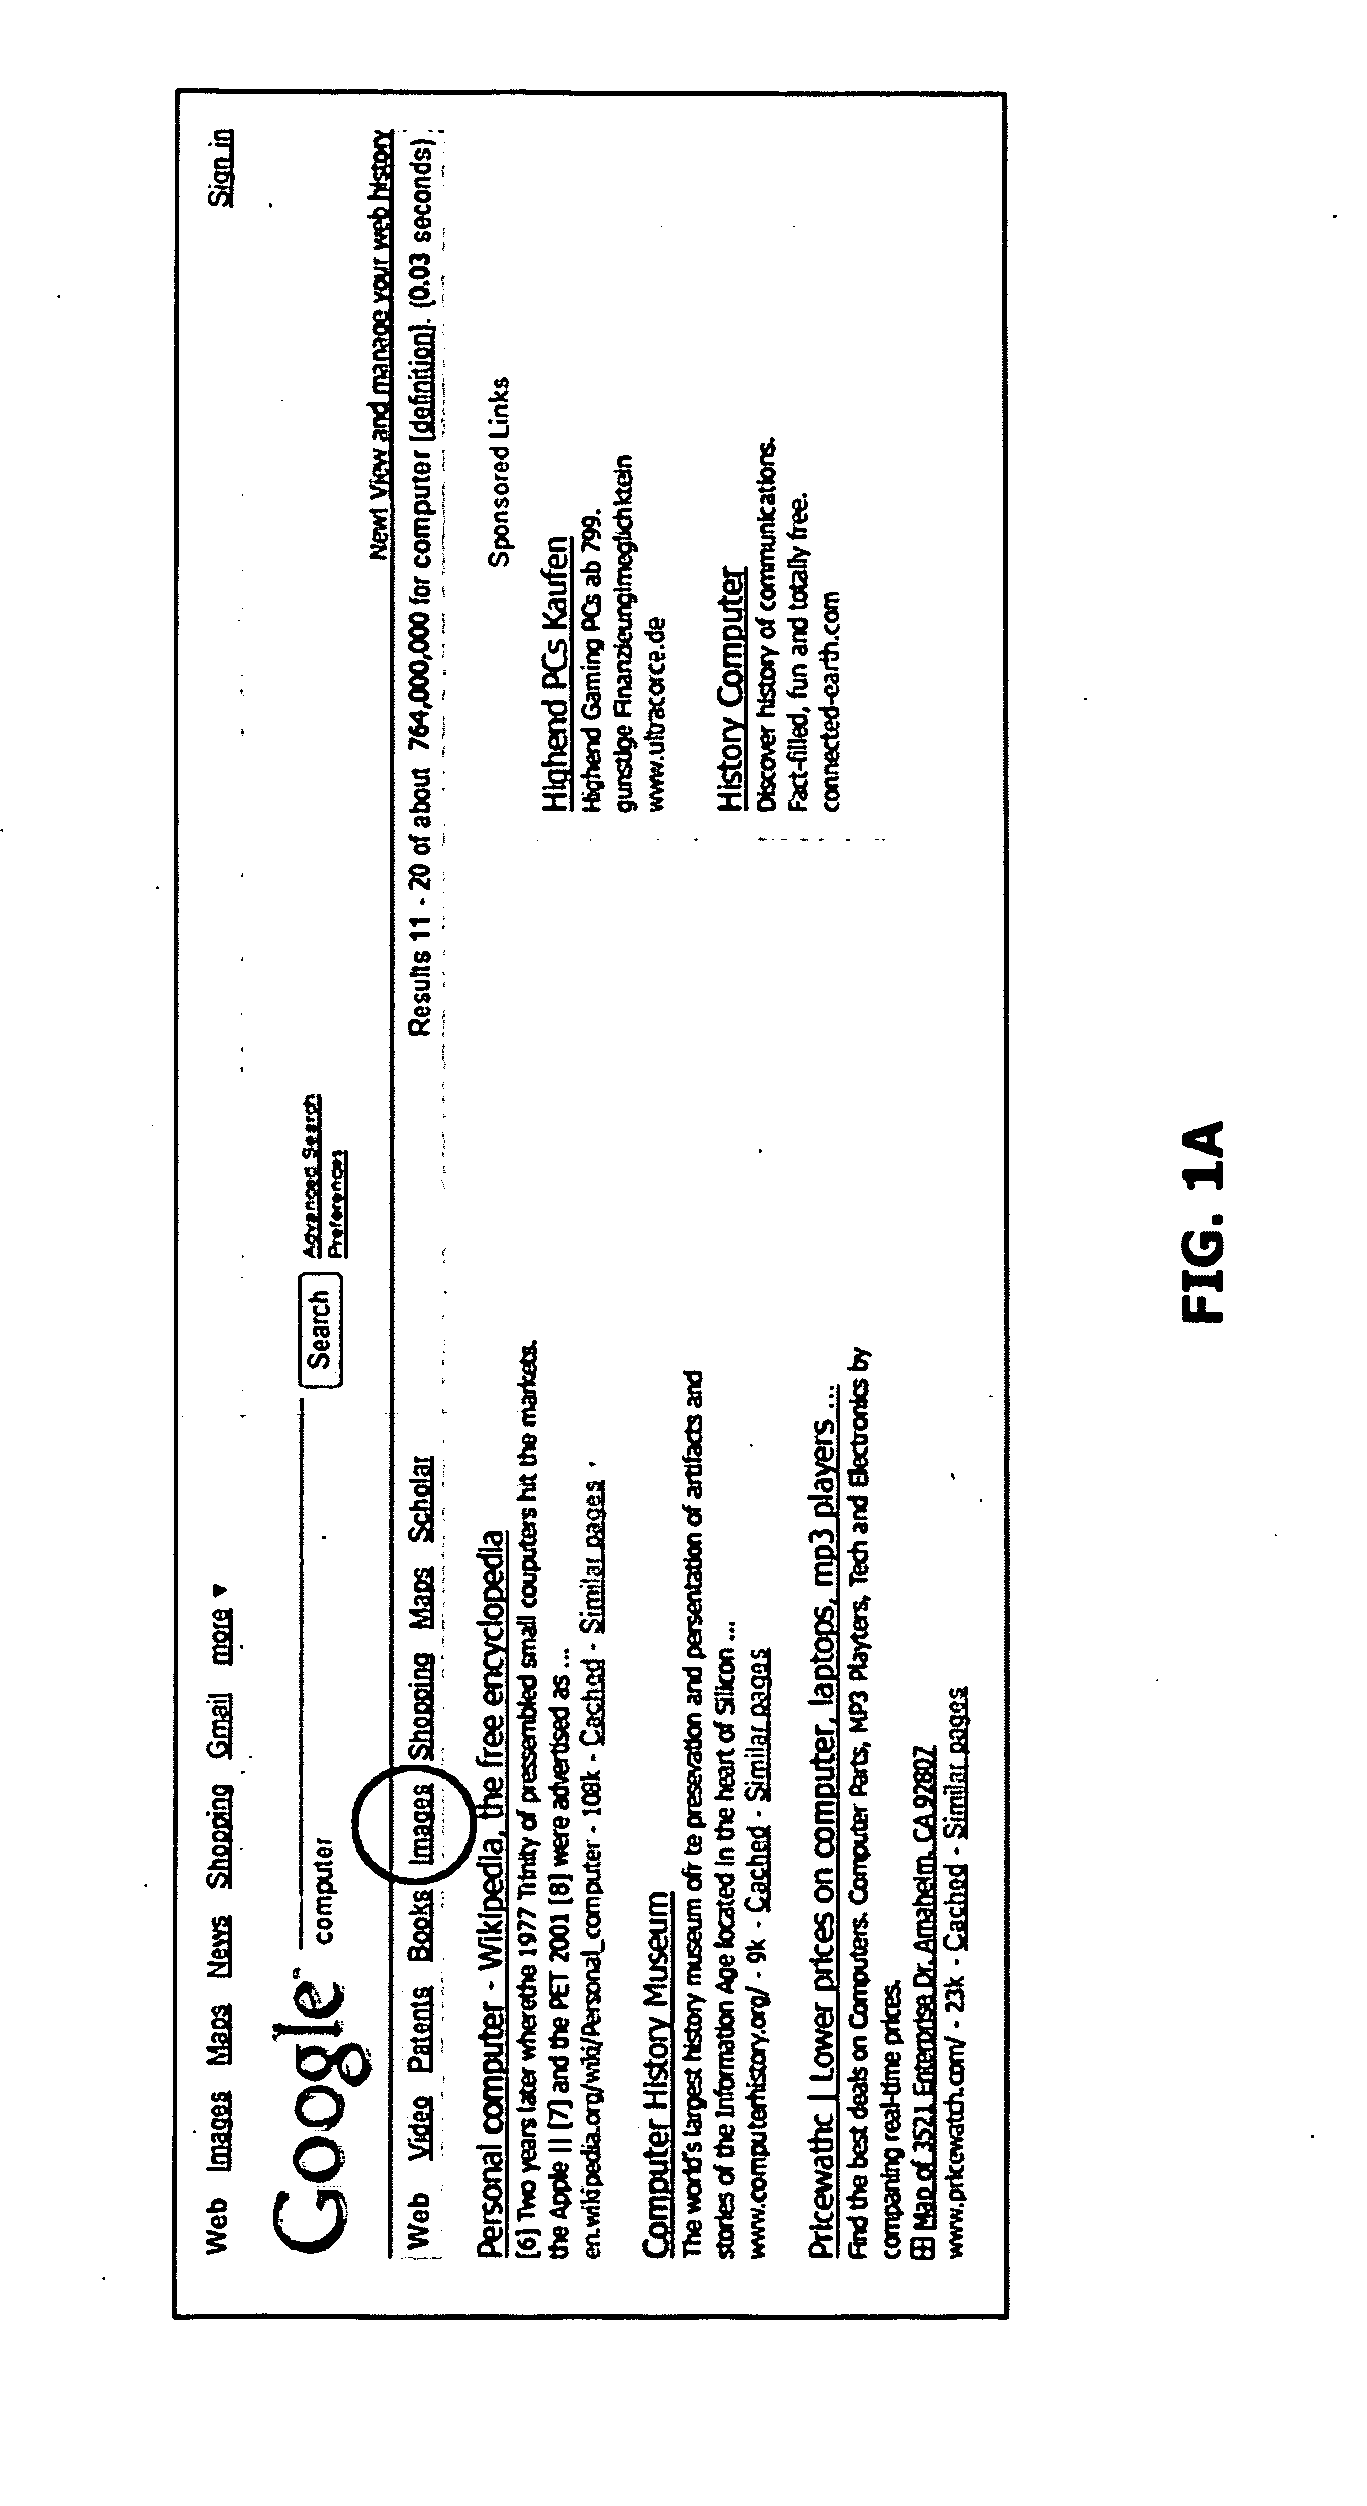 Image-based search system and method